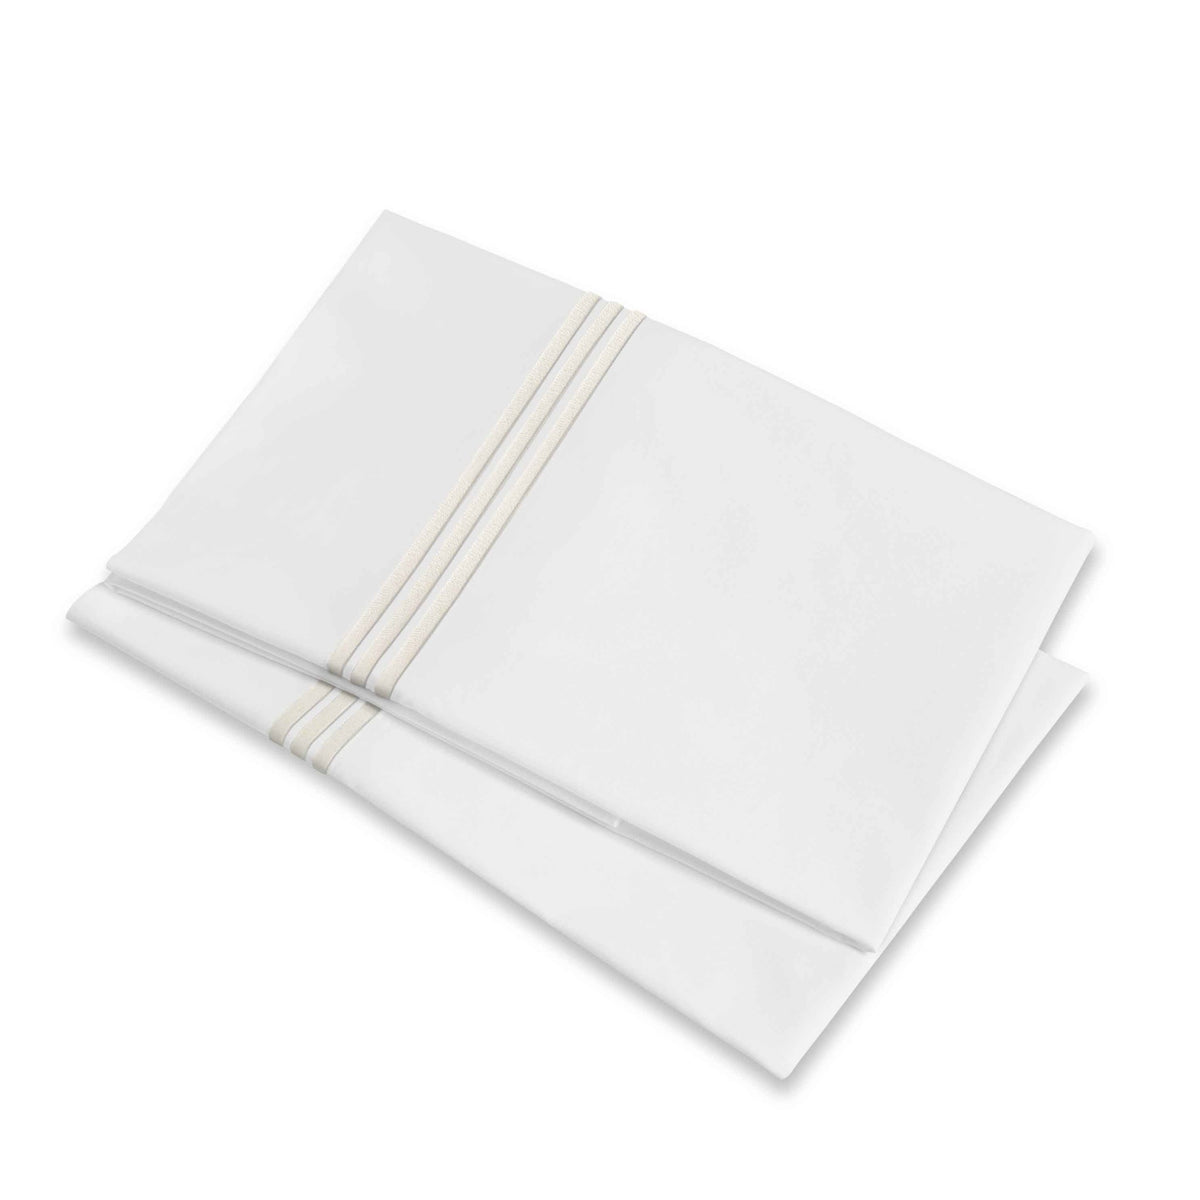 Folded Pillowcases of Signoria Platinum Percale Bedding in White/Ivory Color